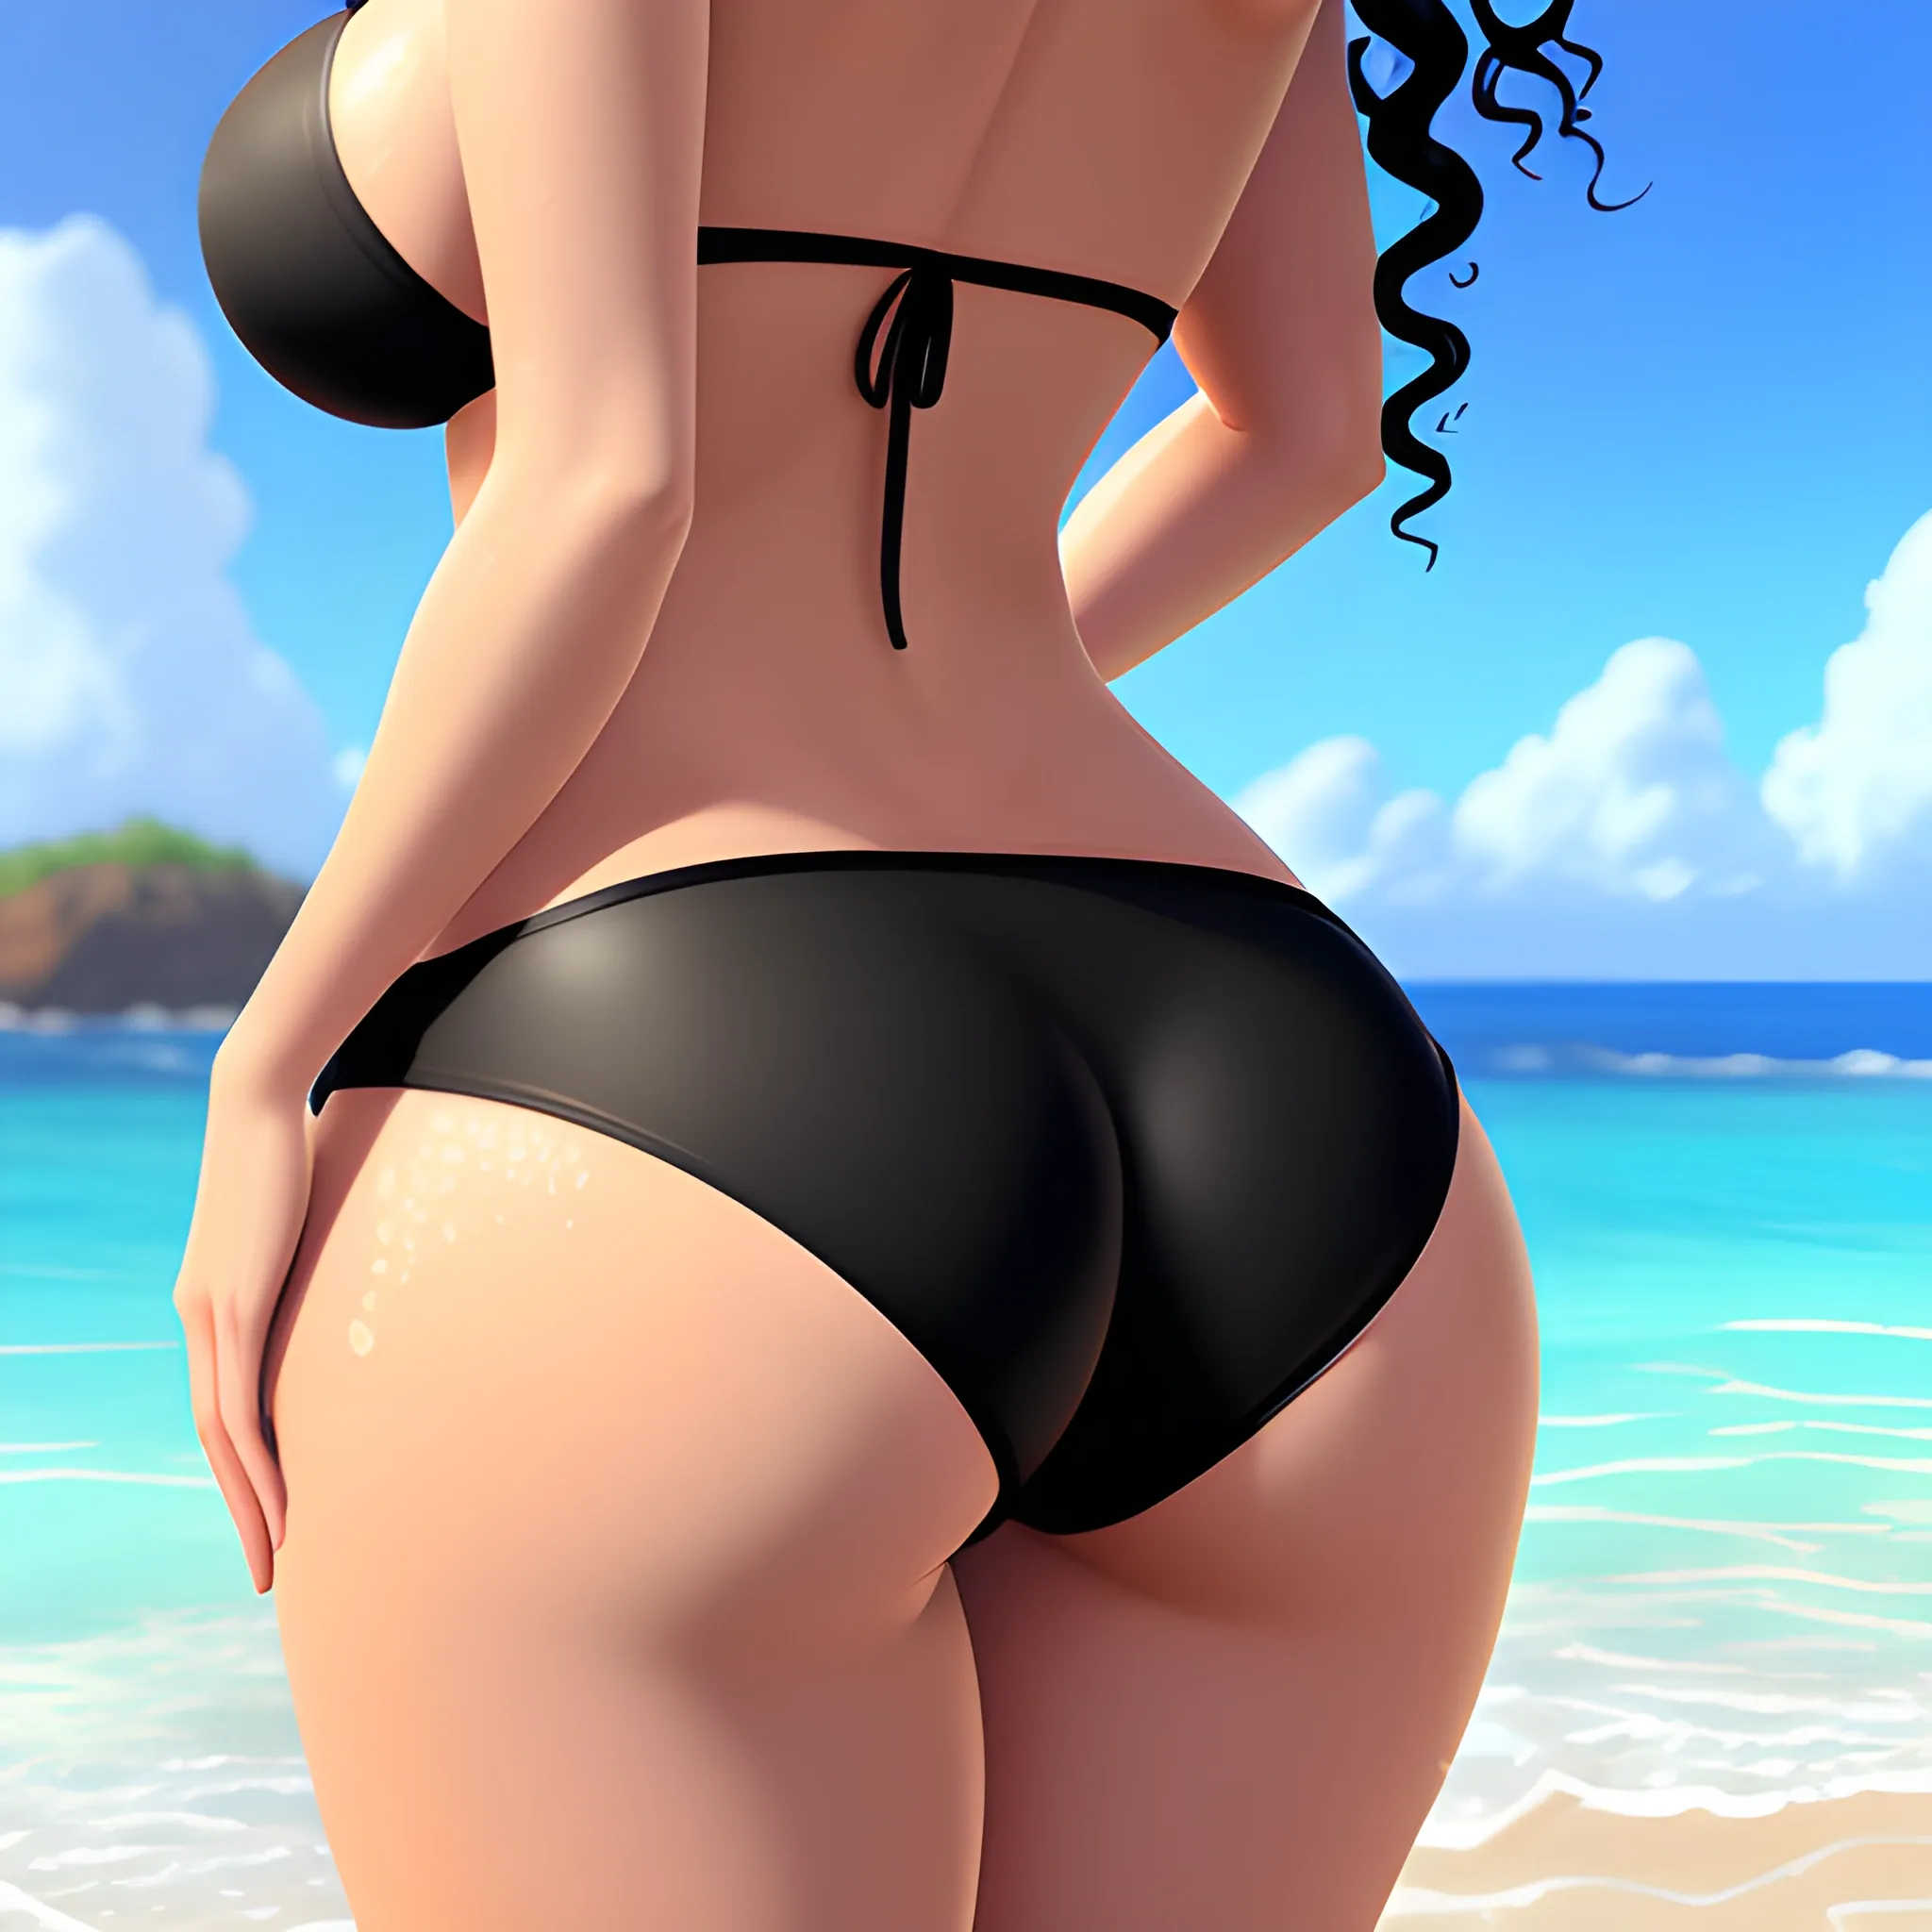 beach, rear view,cute girl,cartoon,hand under big butt, 1 girl, black curly hair, black micro bikini, black choker, perfect face expressions, perfect anatomy, medium breasts, wide hips, thicc thighs, wet skin, beach, summer, bathing in the sea water, splashing water, extremely detailed CG, high detail, extremely detailed artwork, masterpiece artwork

, 3D